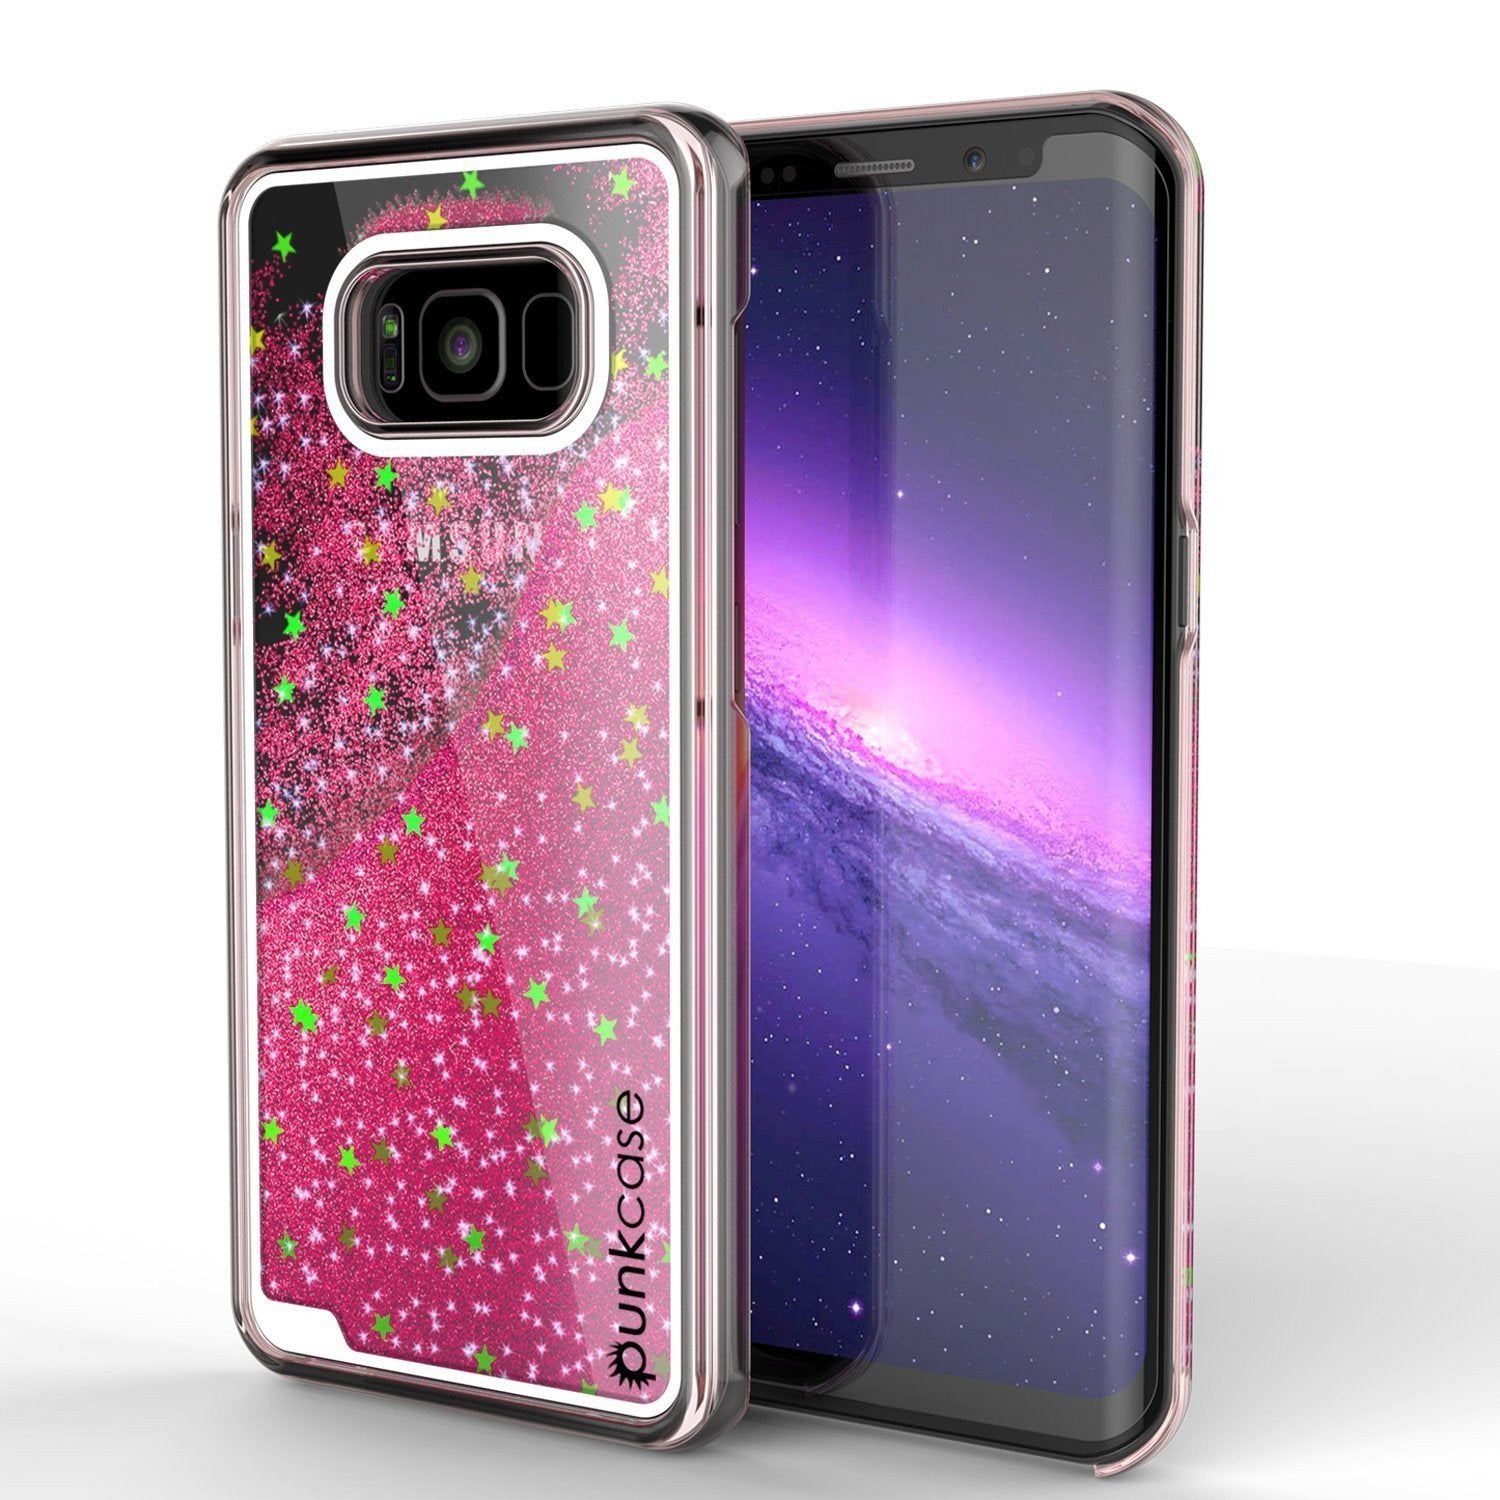 Galaxy S8 Case, Punkcase Liquid Pink Series Protective Glitter Cover